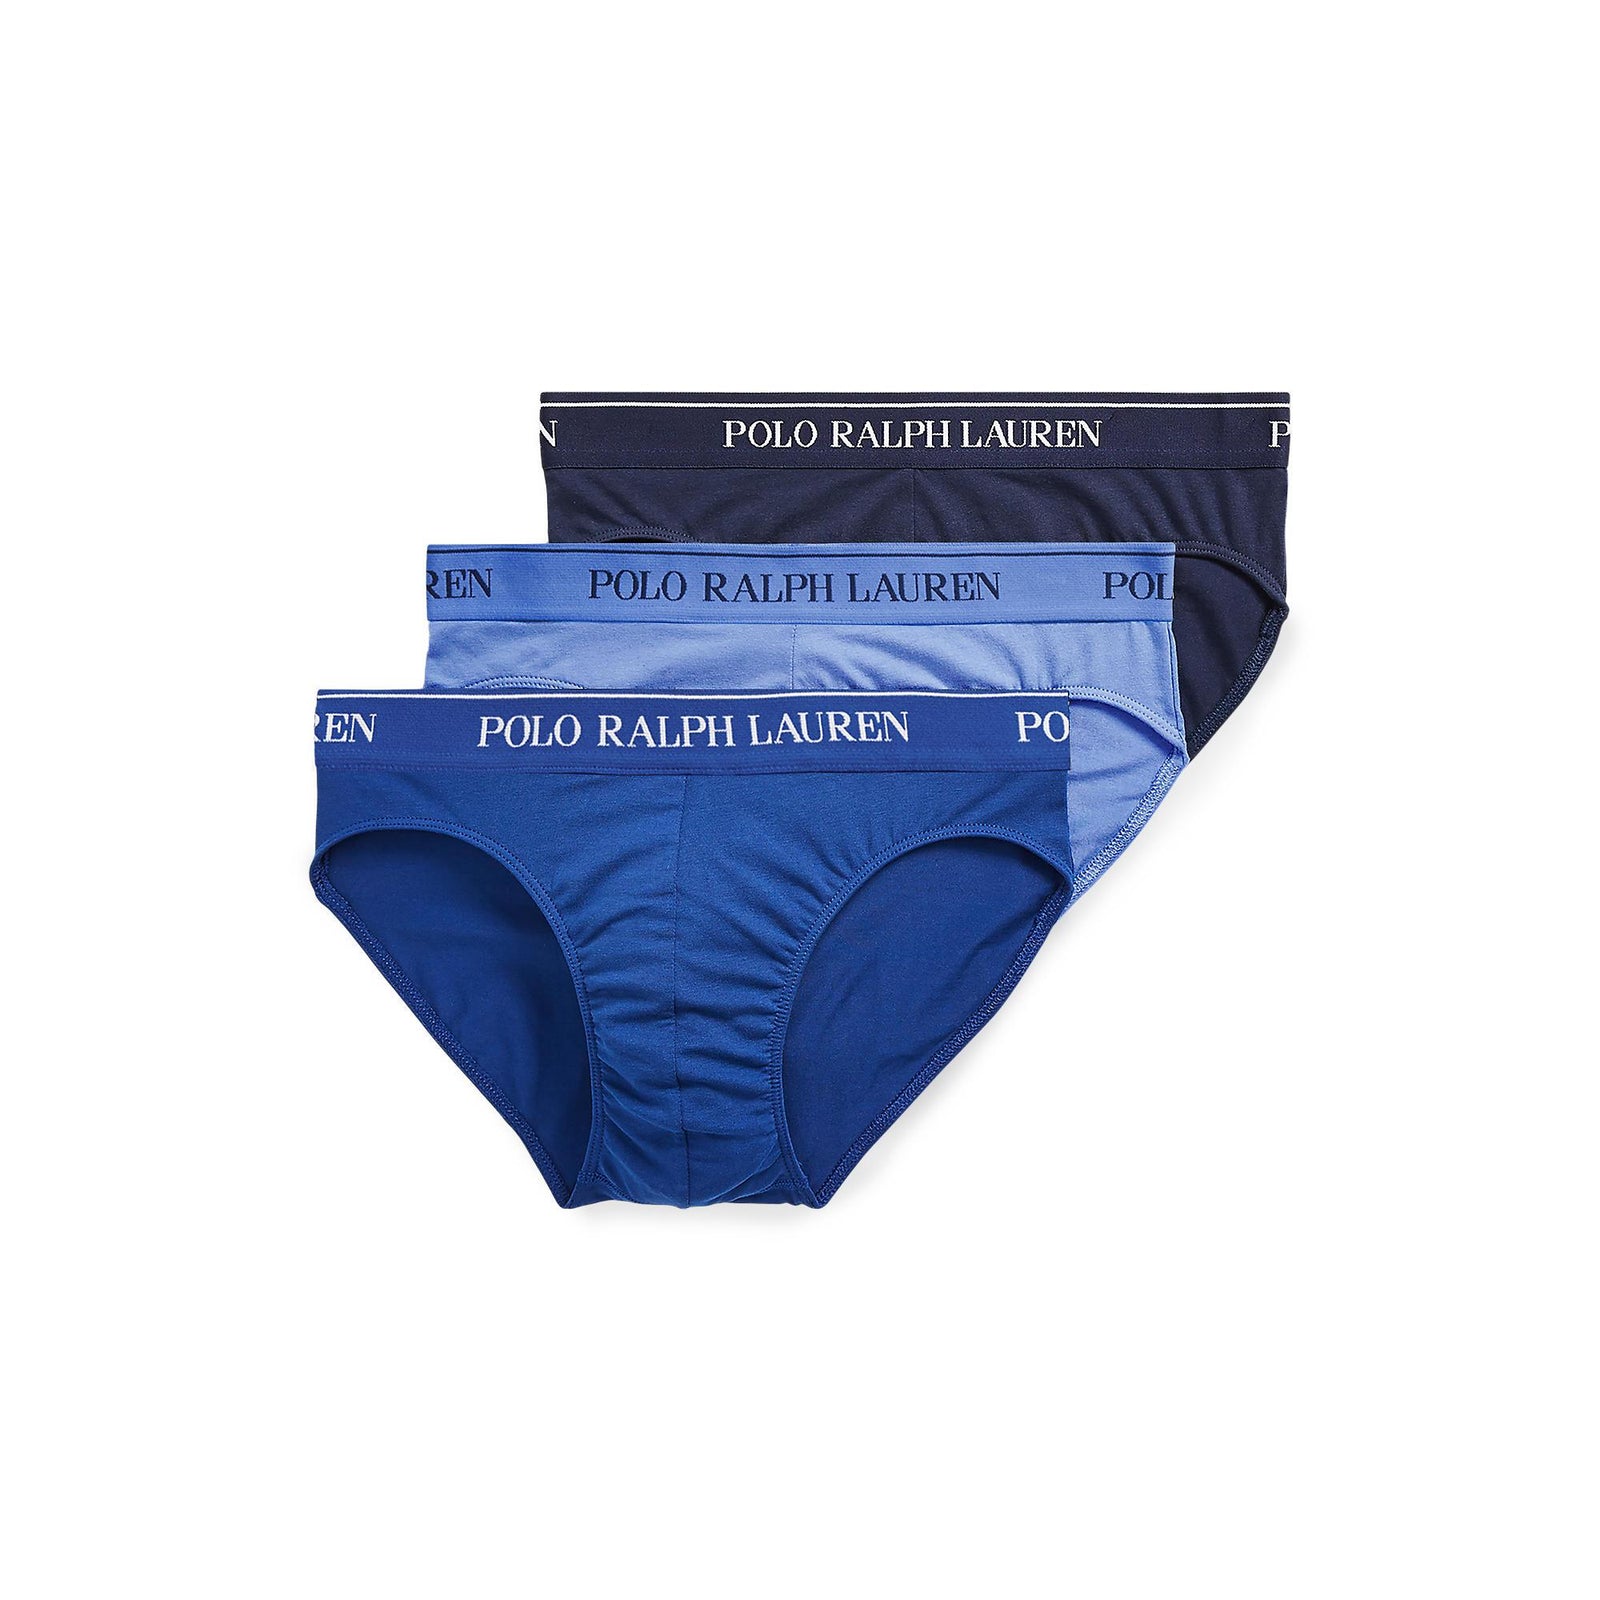 LOW-RISE-BRIEF 3-PACK - Yooto